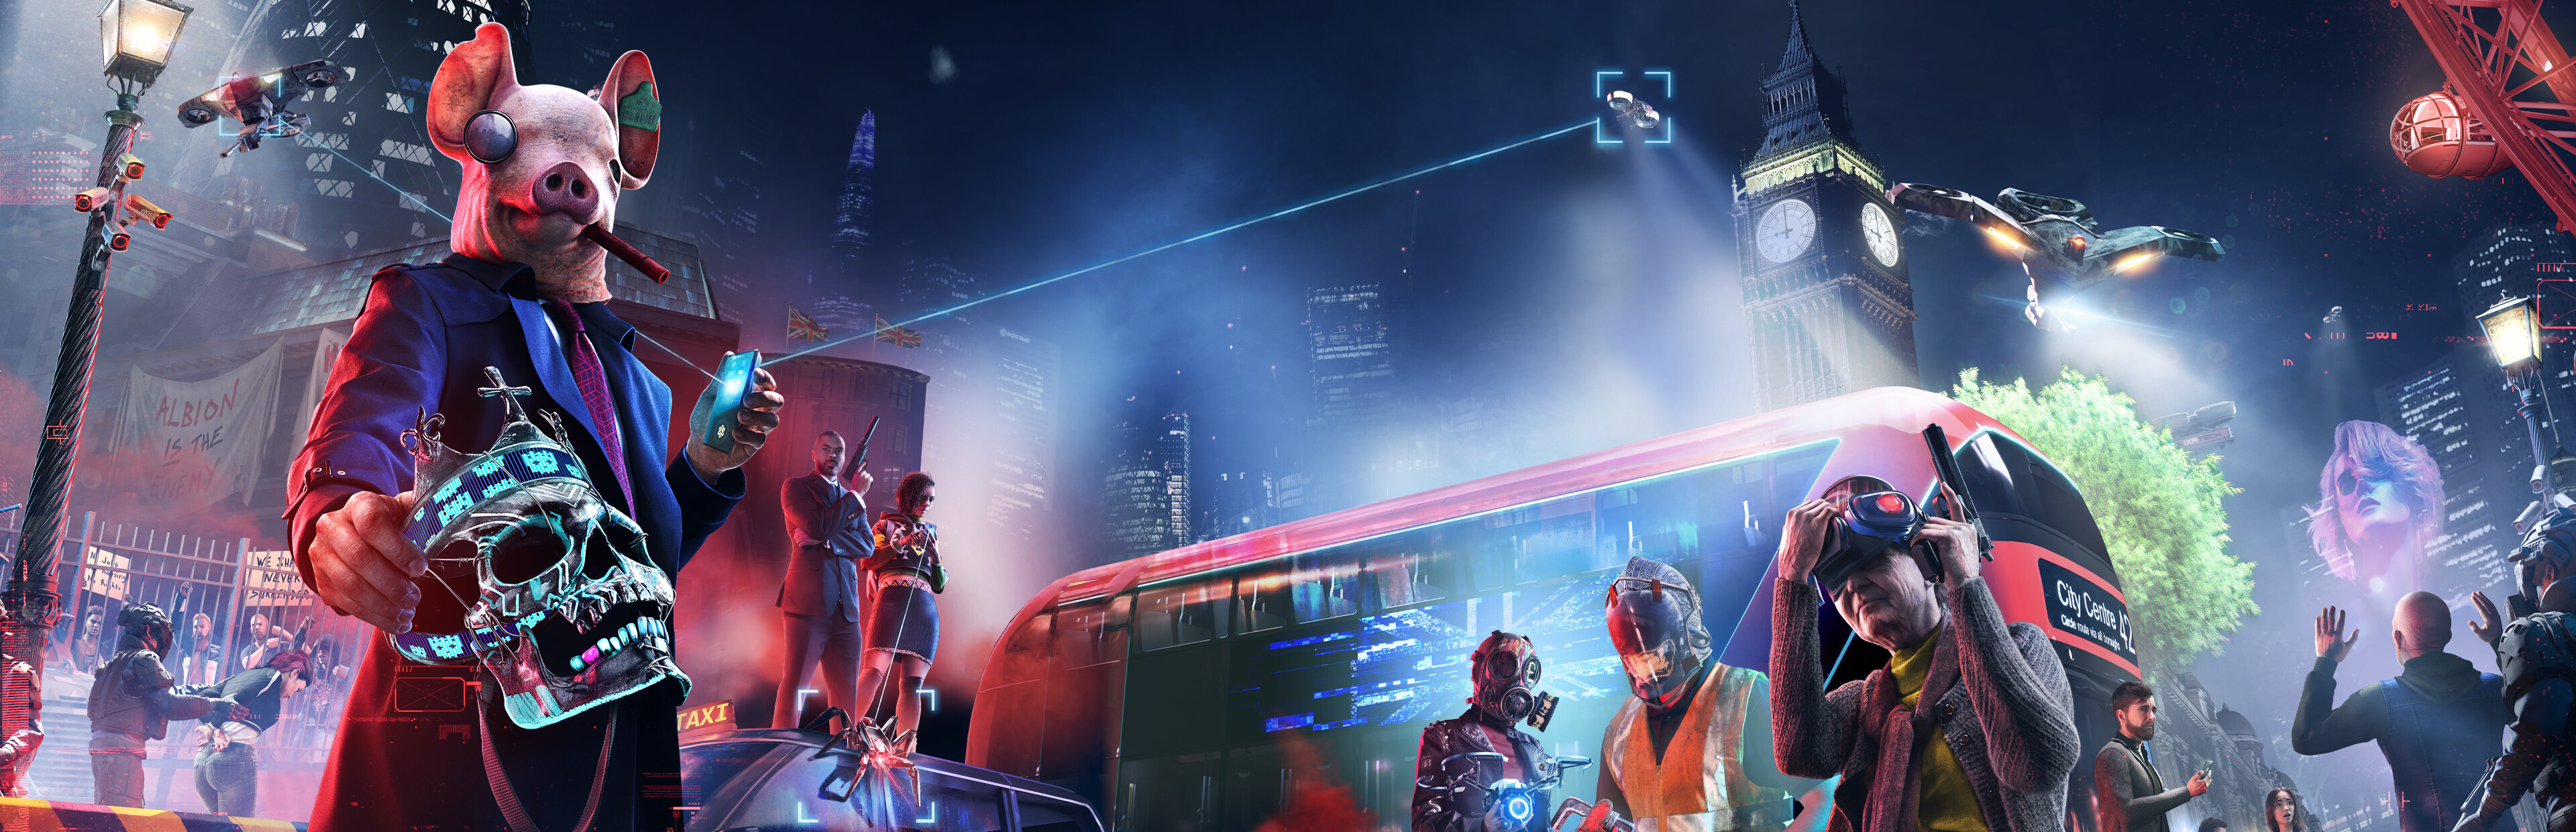 Watch Dogs Legion - 30 FPS on the Steam Deck - Gameplay and Benchmark  #steamdeck 